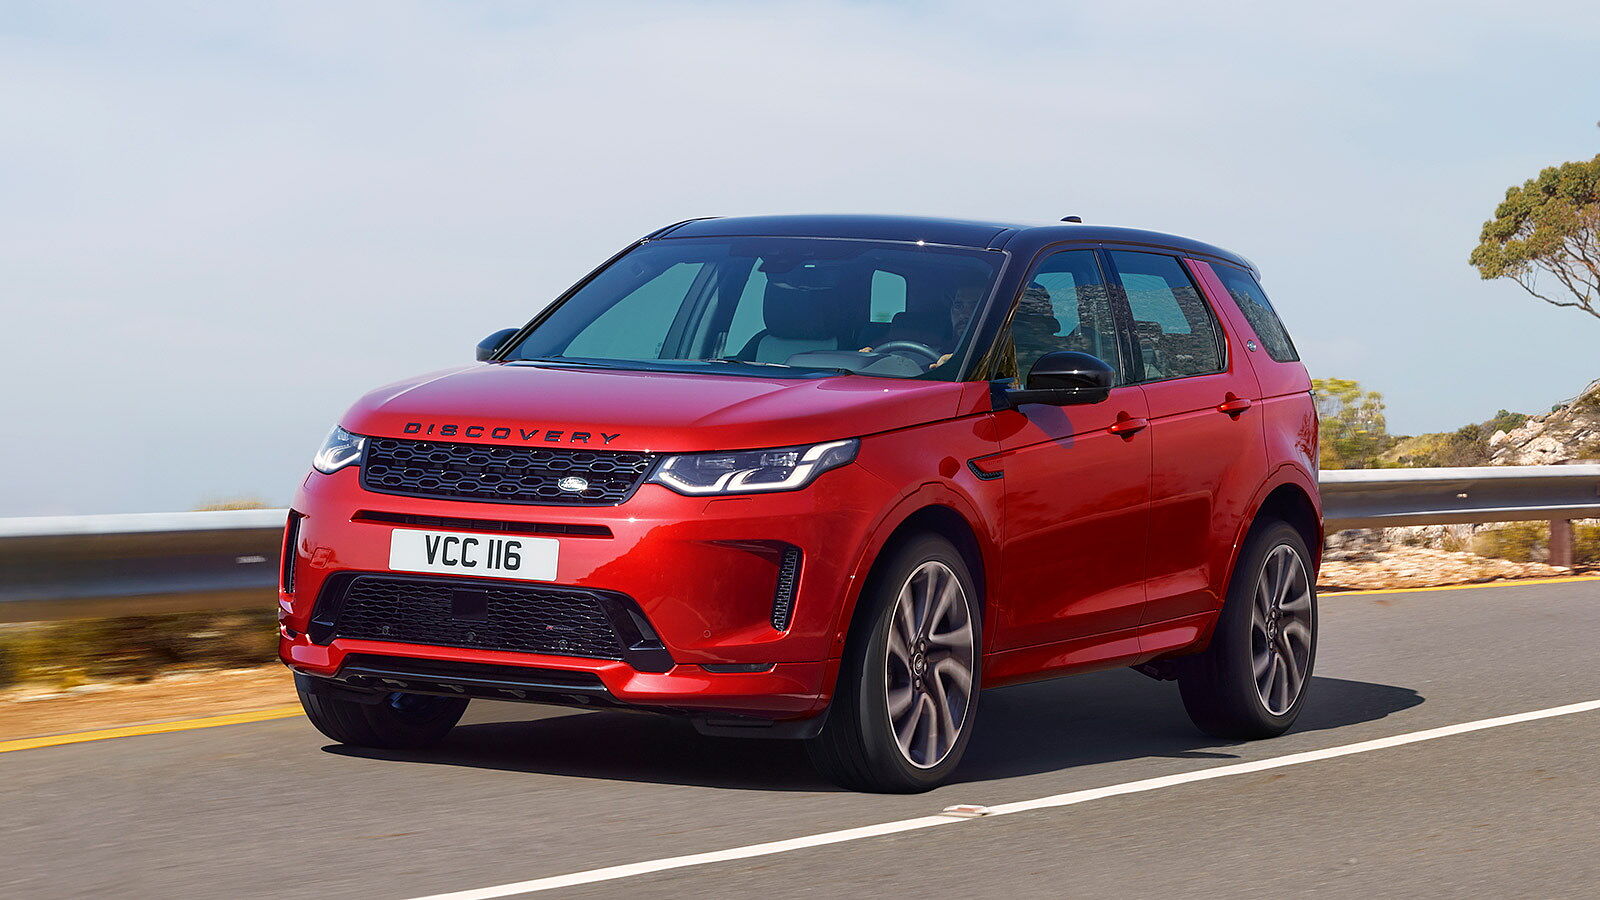 How Much is a New Land Rover Discovery Sport?